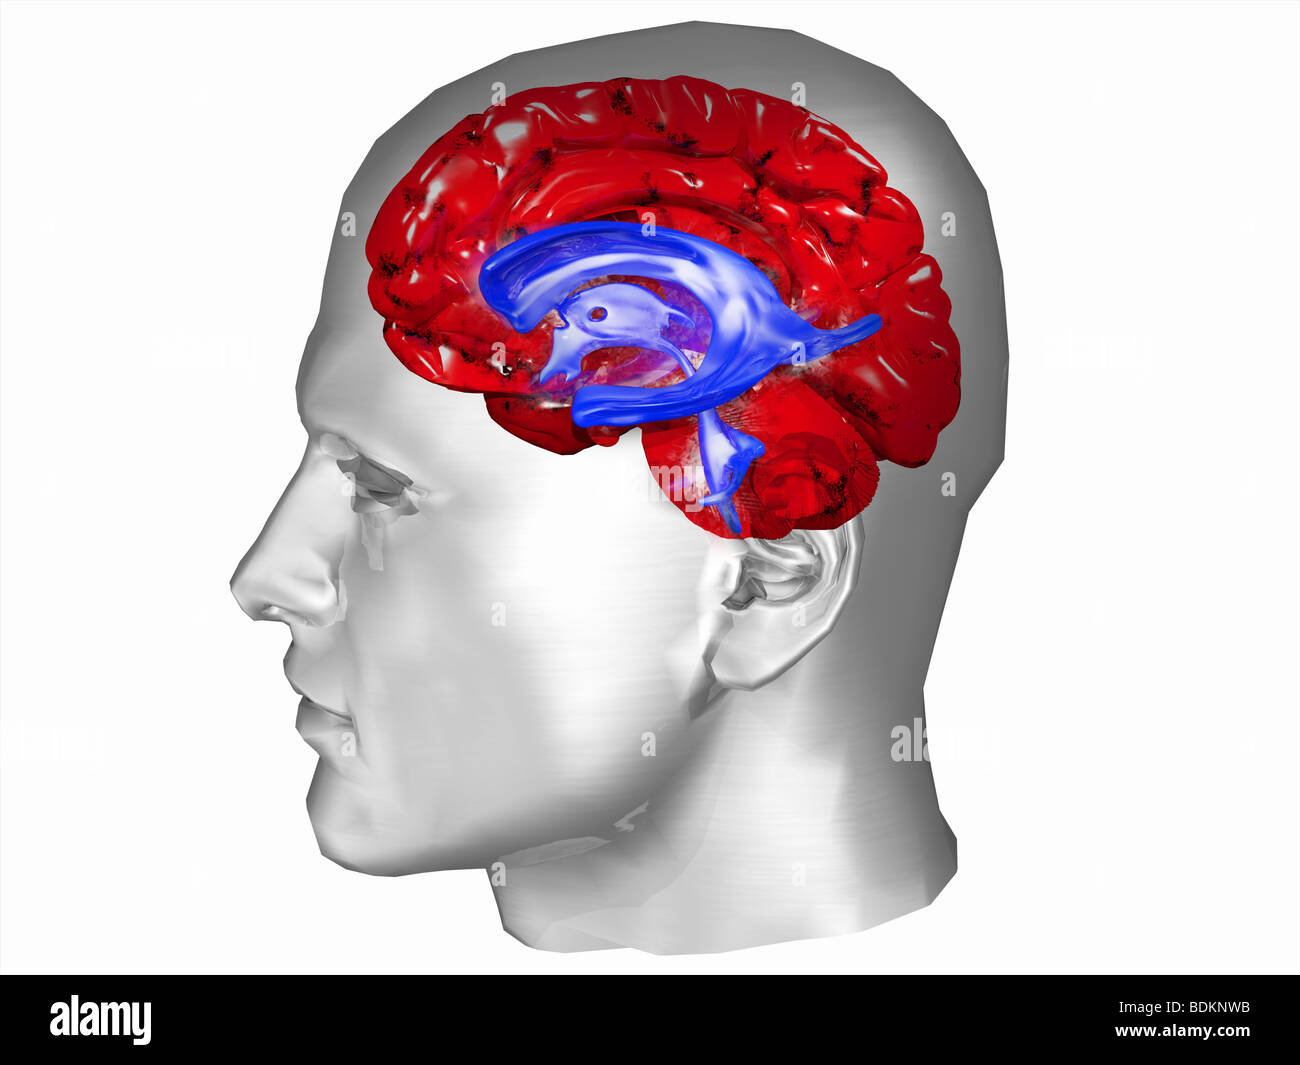 Brain and ventricular system within a human head Stock Photo